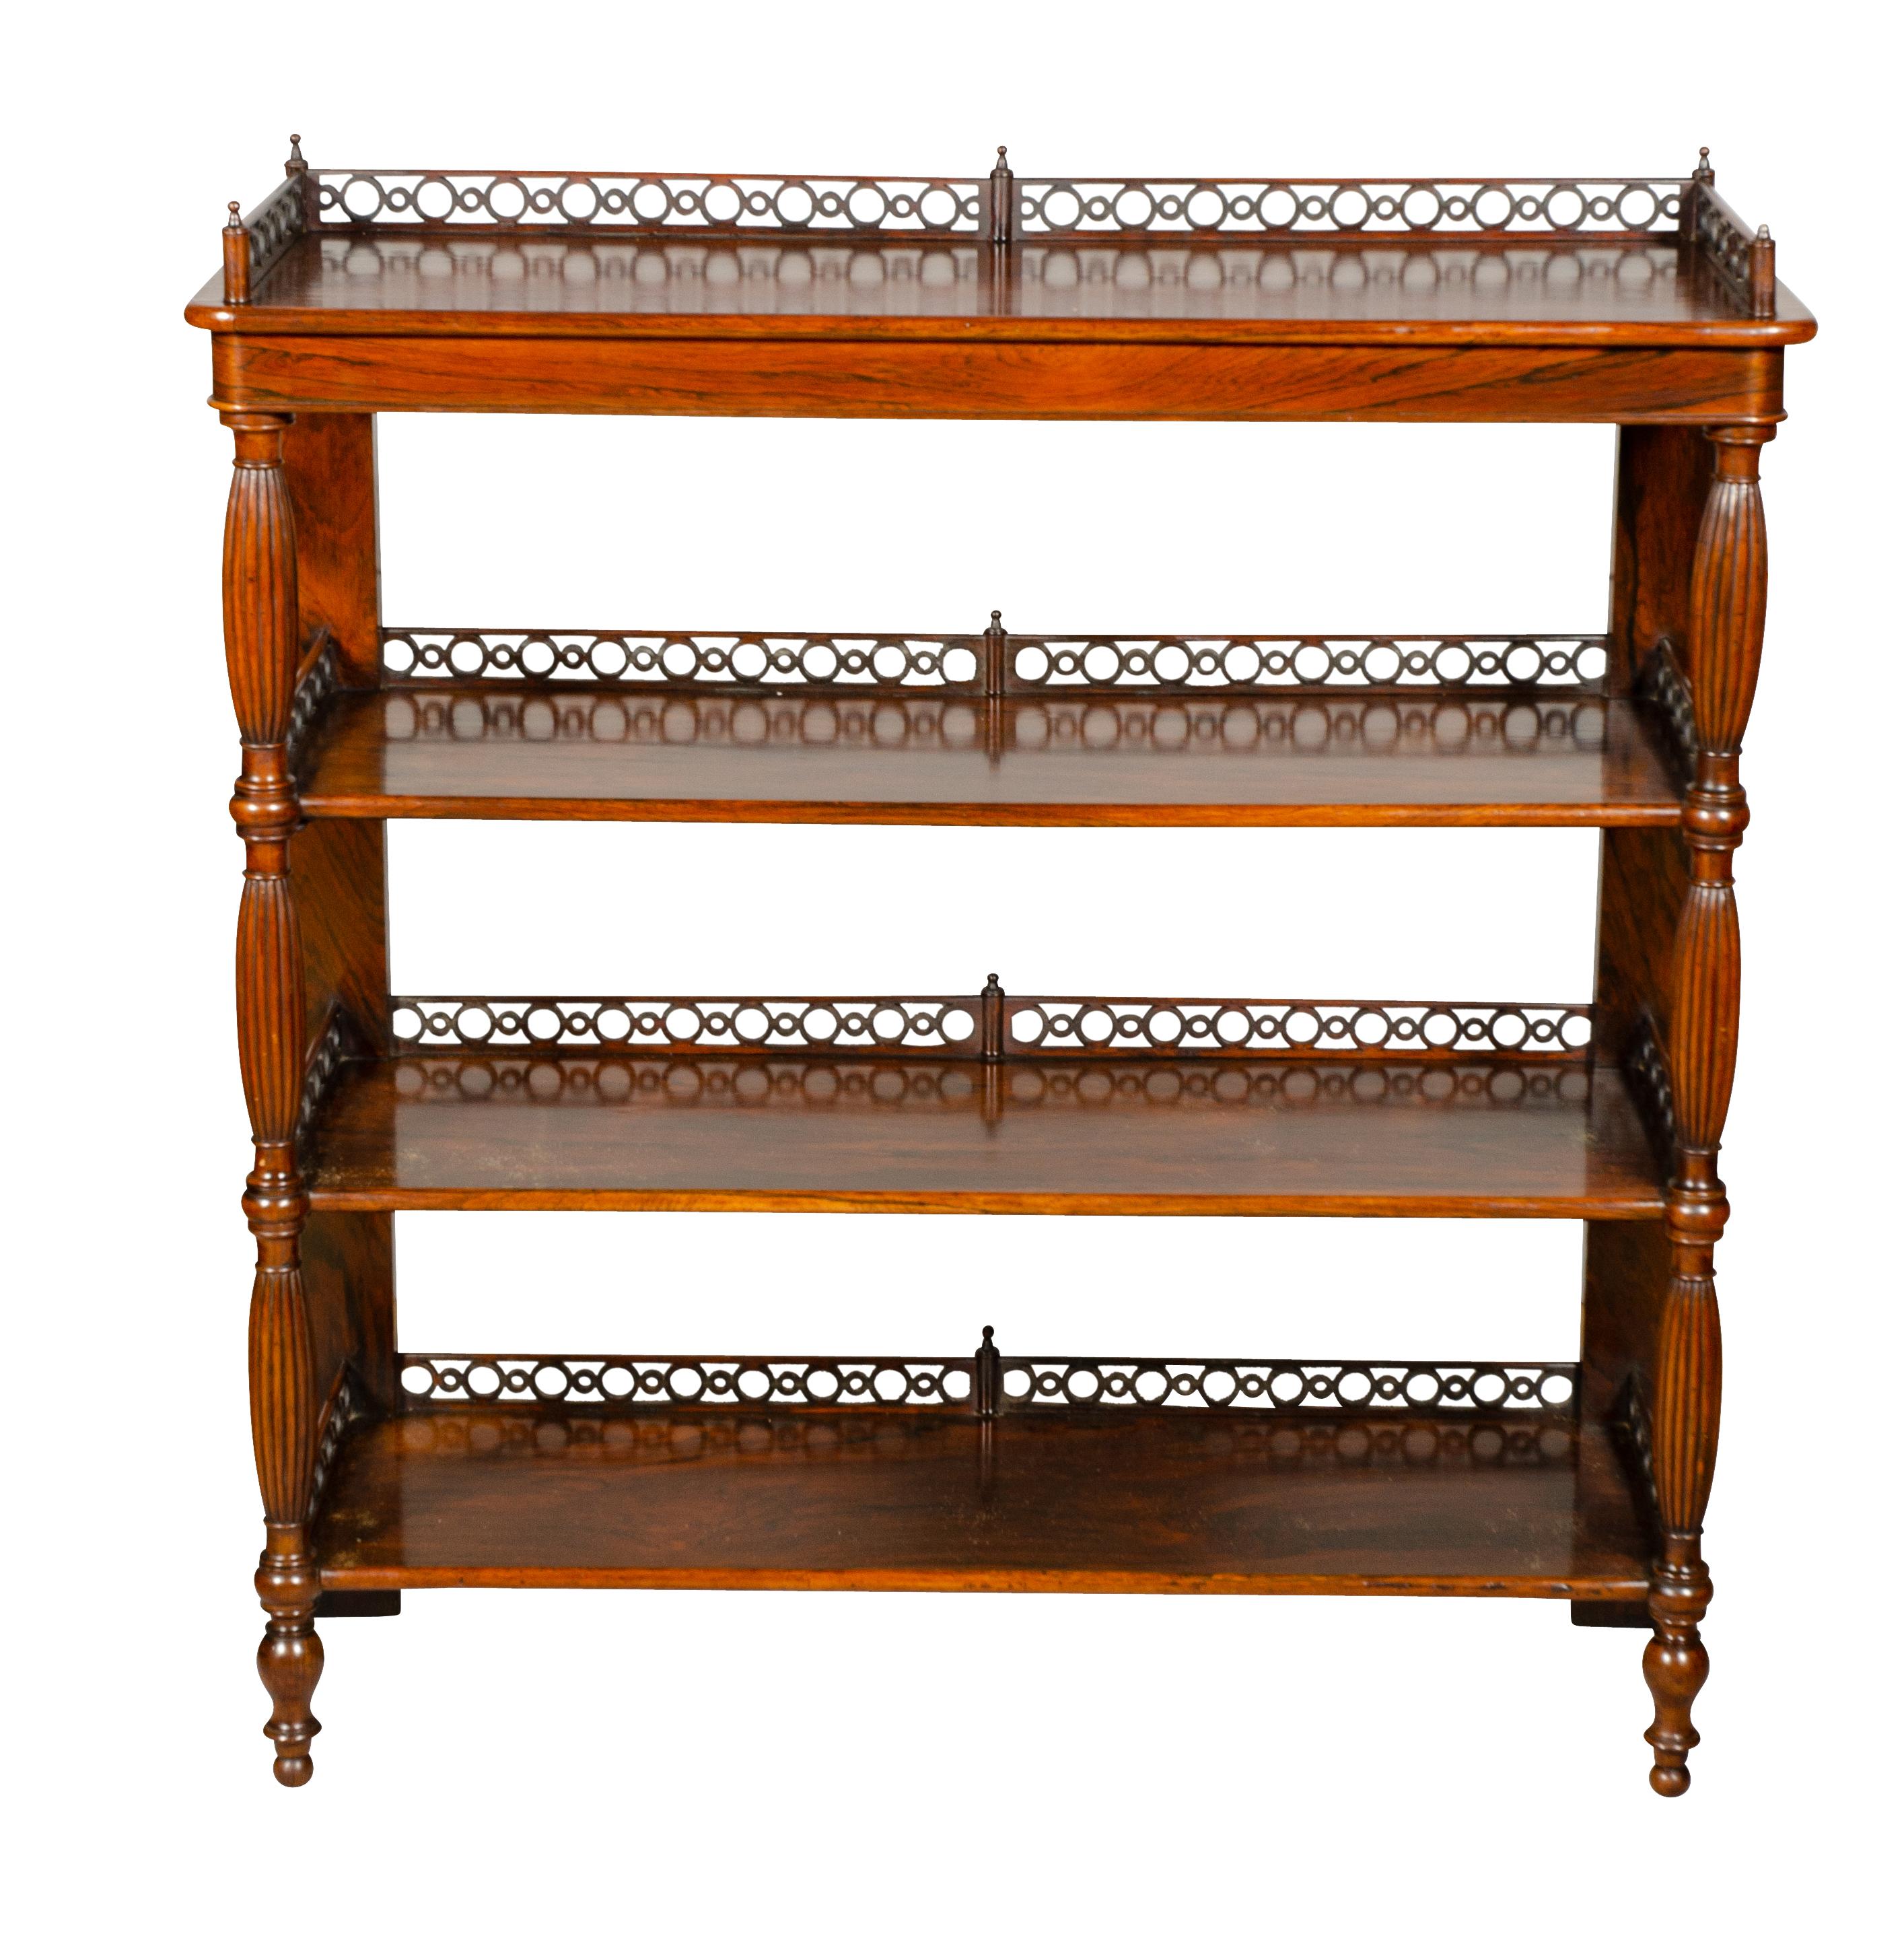 With rectangular top with intricate fretwork 3/4 gallery with alternating larger and smaller rings over three lower shelves all with 3/4 gallery all supported on reeded legs ending on toupie feet. Great condition and well made.